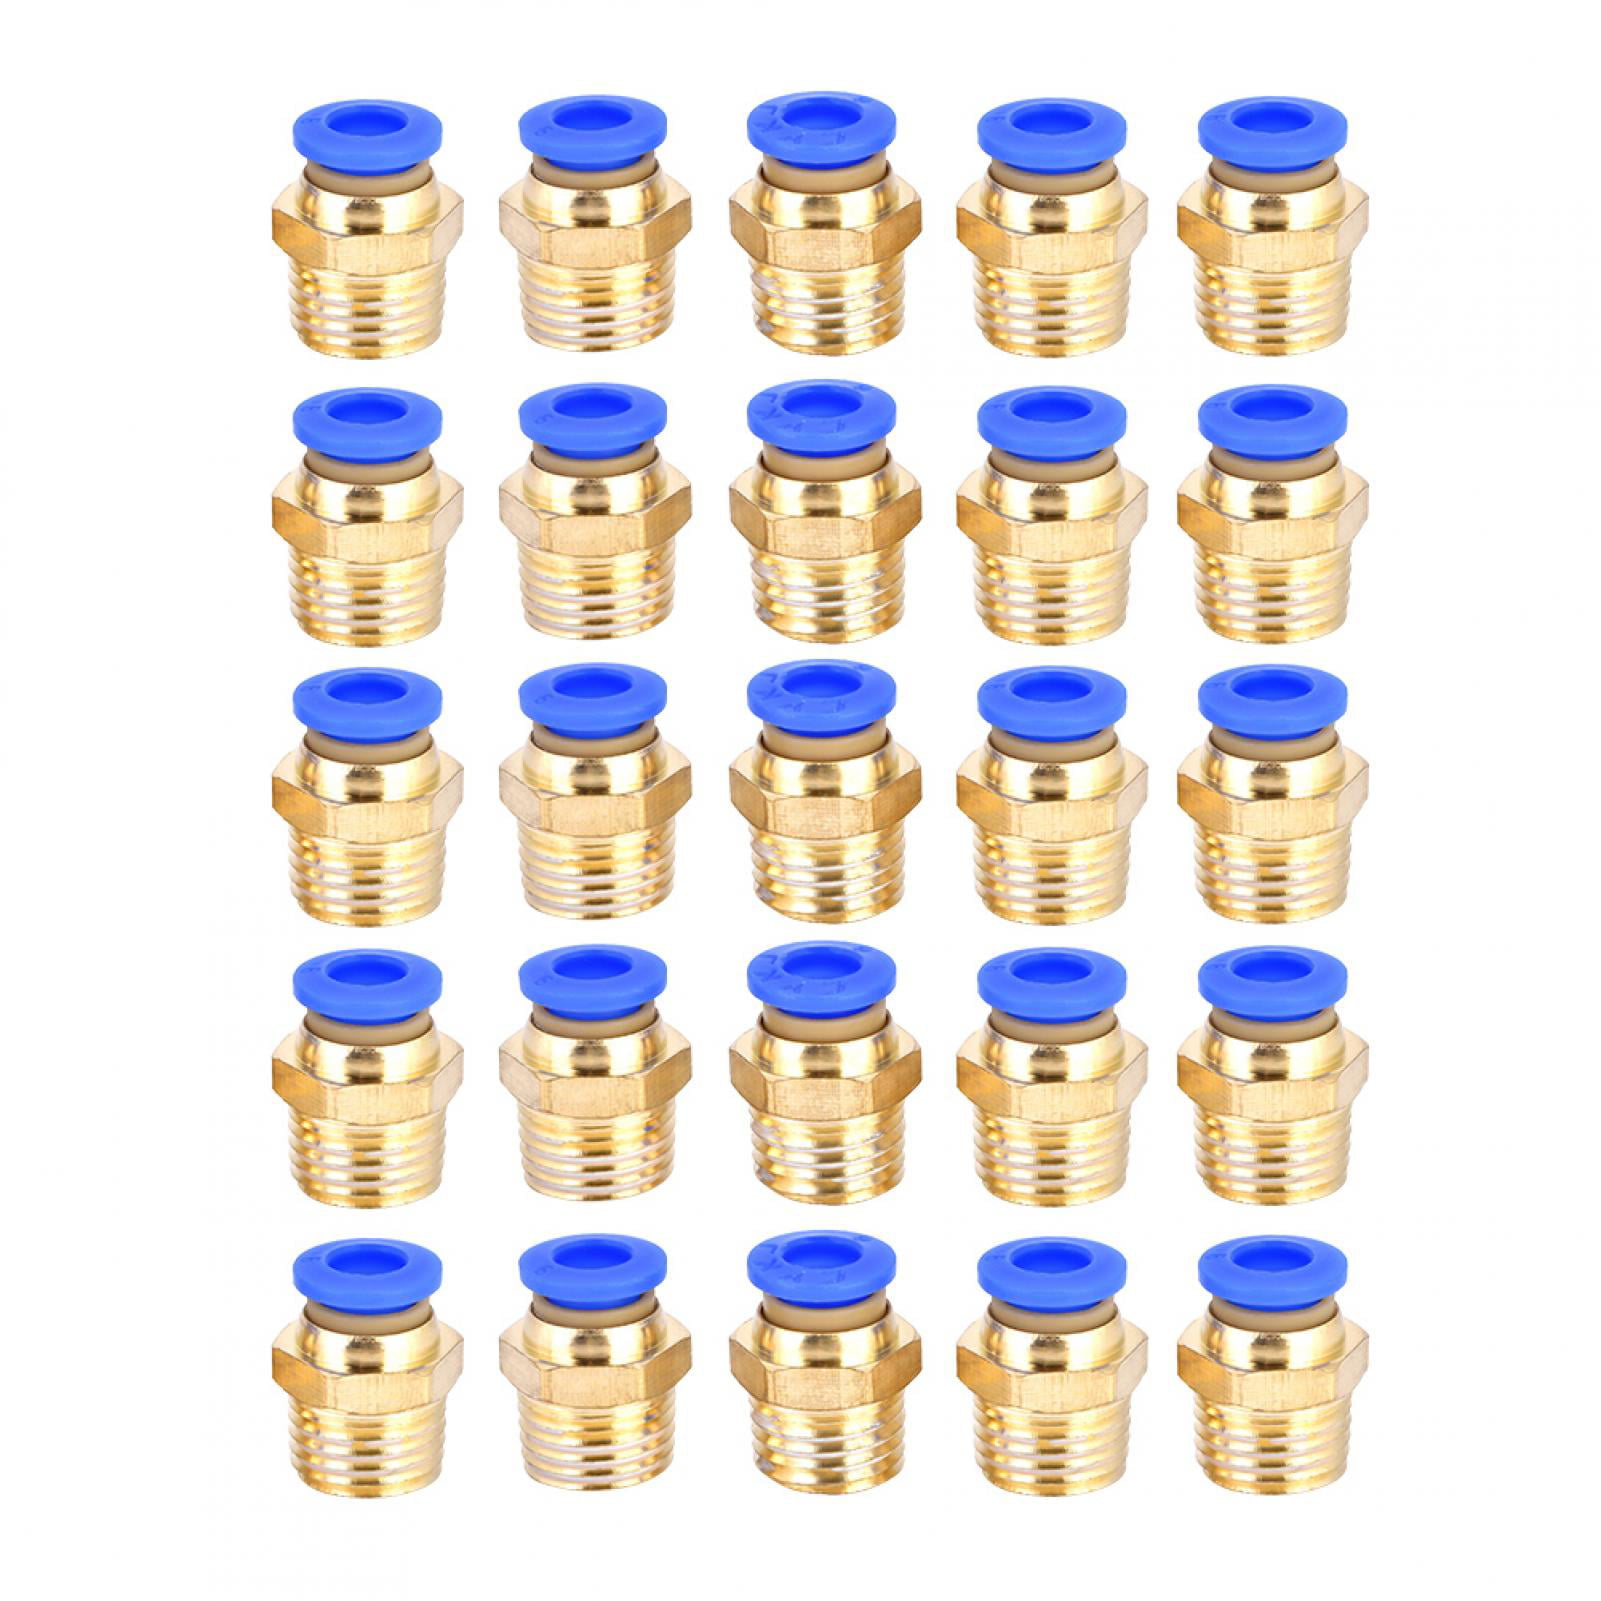 25PCS Pneumatic Push in Connector 1/2" OD Tube x 3/8" Male NPT 90 Degree Elbow 